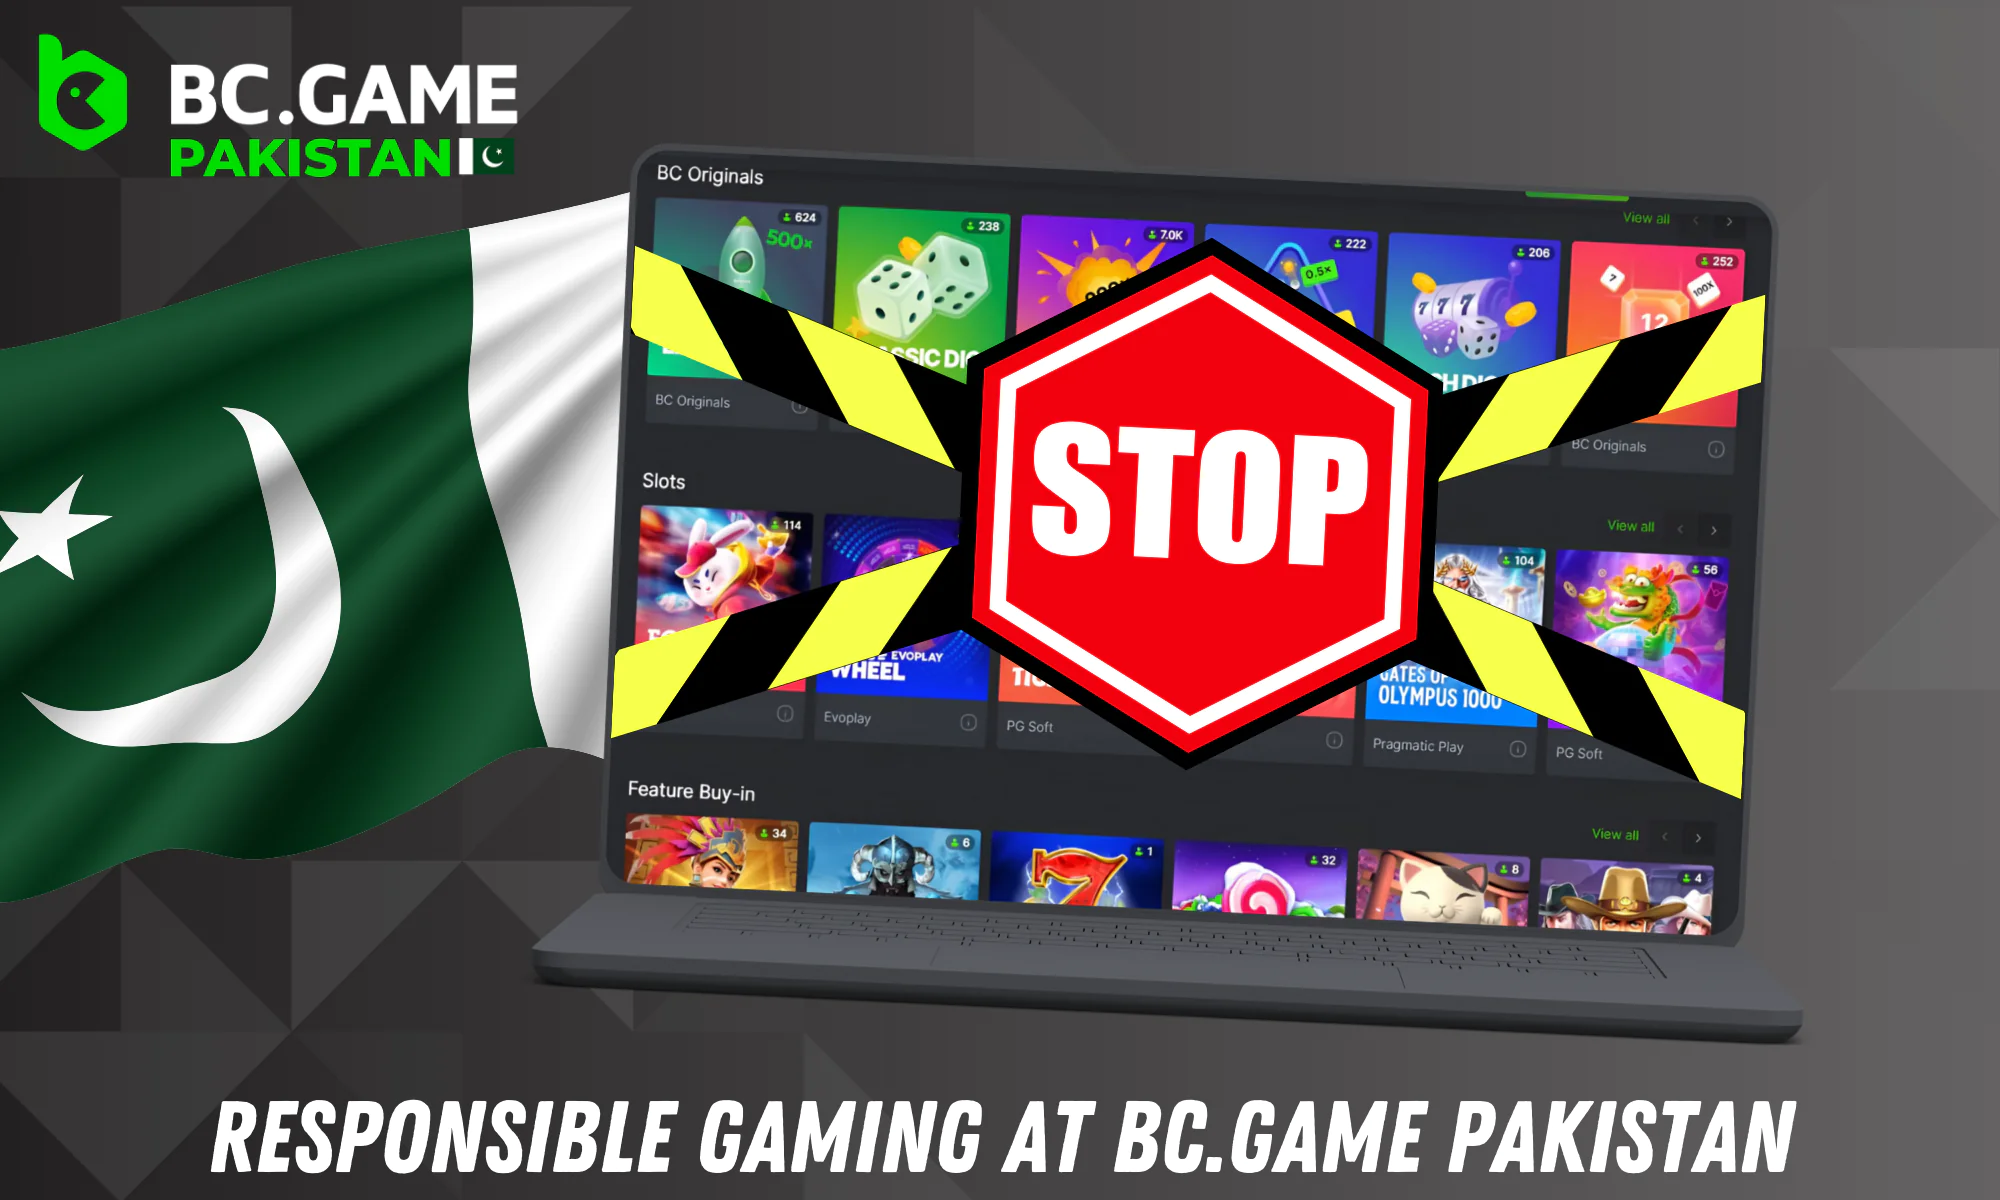 BC.GAME Pakistan supports the principle of conscious gaming and helps its users